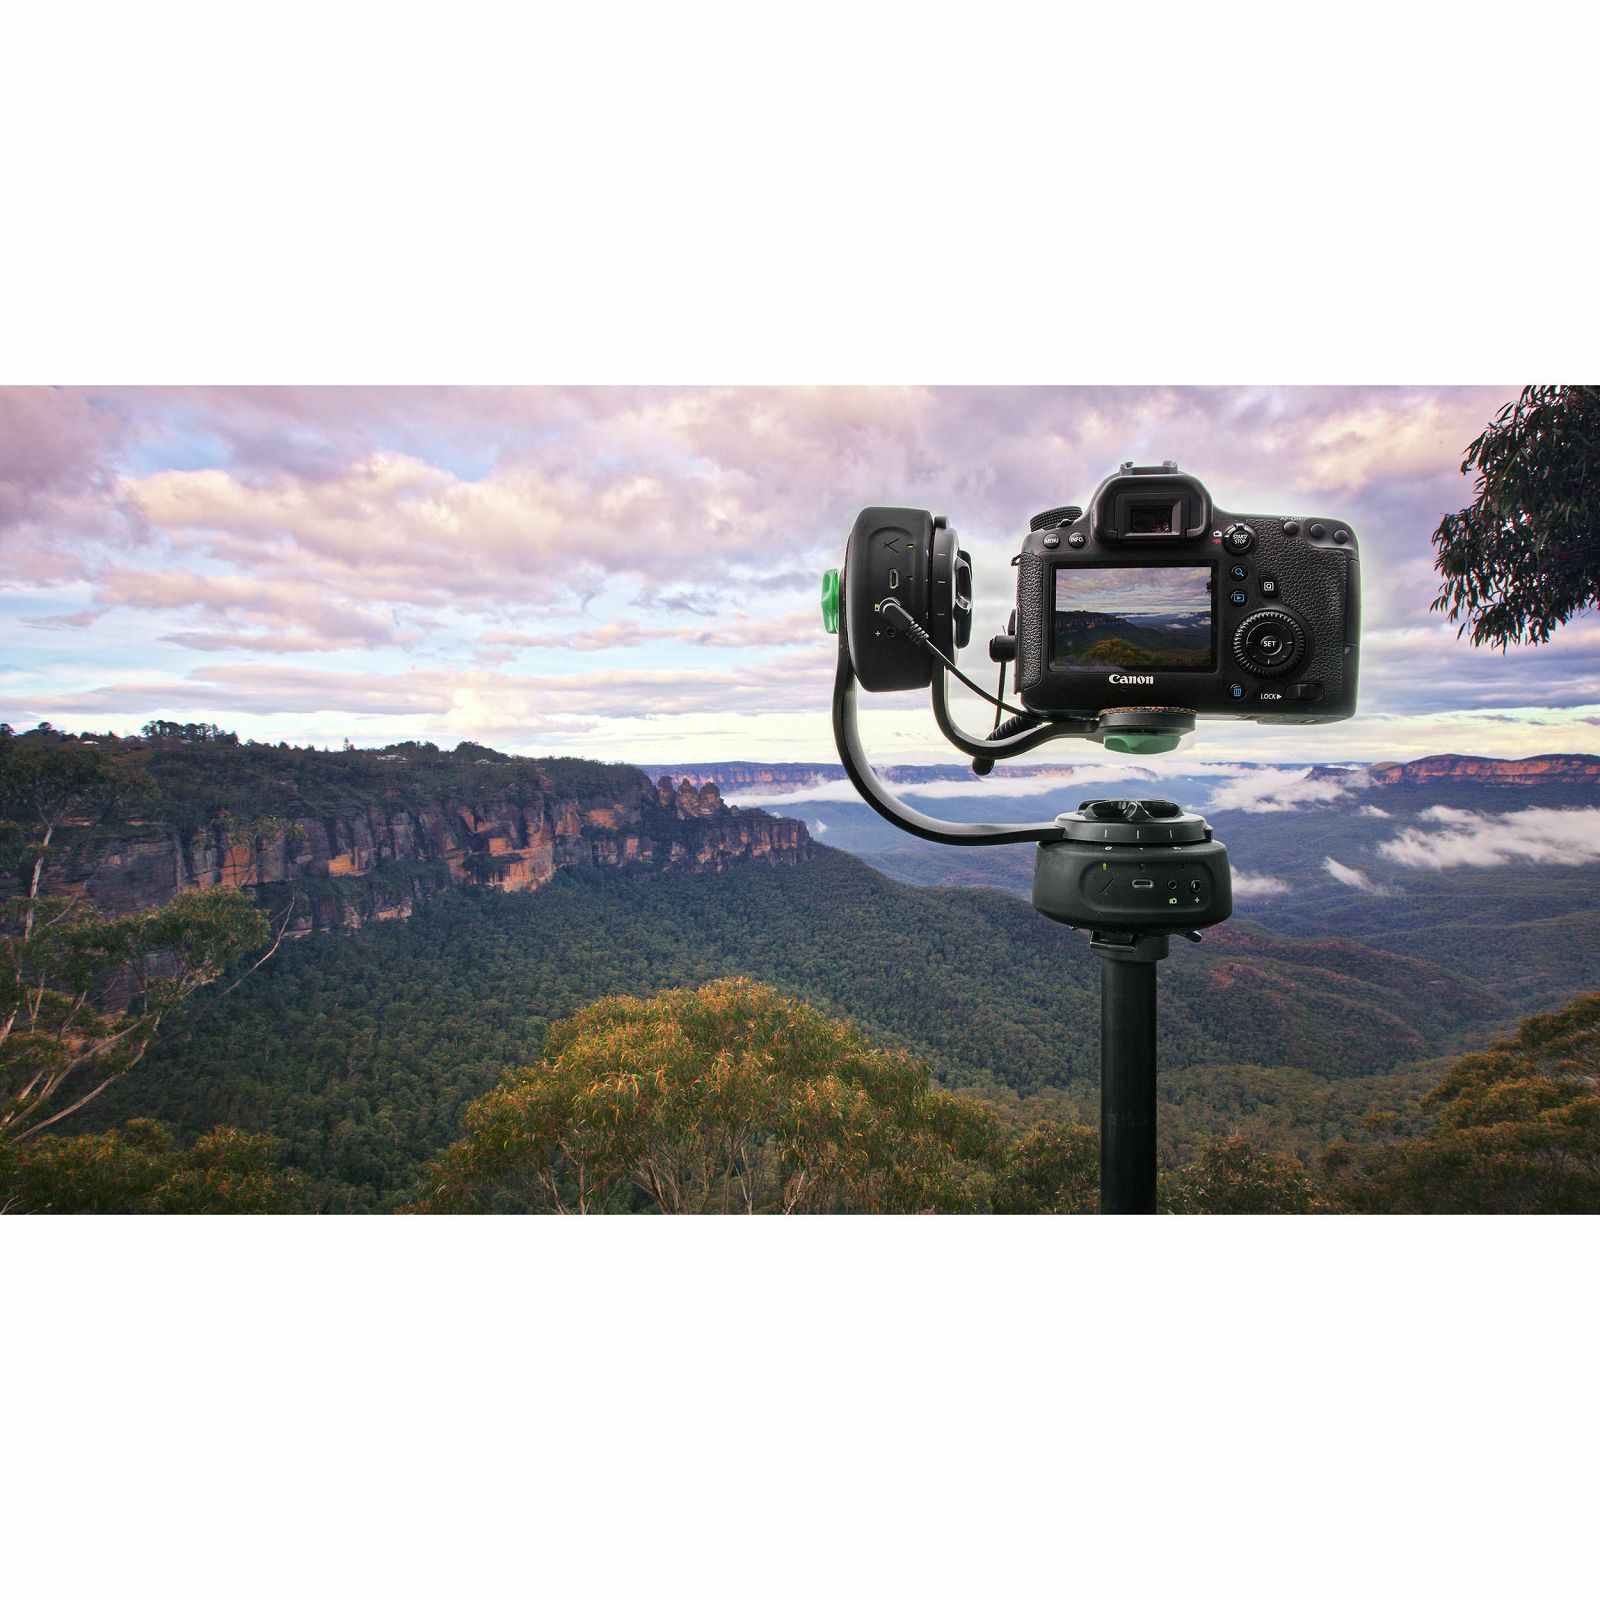 Syrp Pan Tilt Bracket for Genie and Genie Mini Enables 2-axis or 3-axis motion time-lapse and videos using a varied combination (0003-0001)